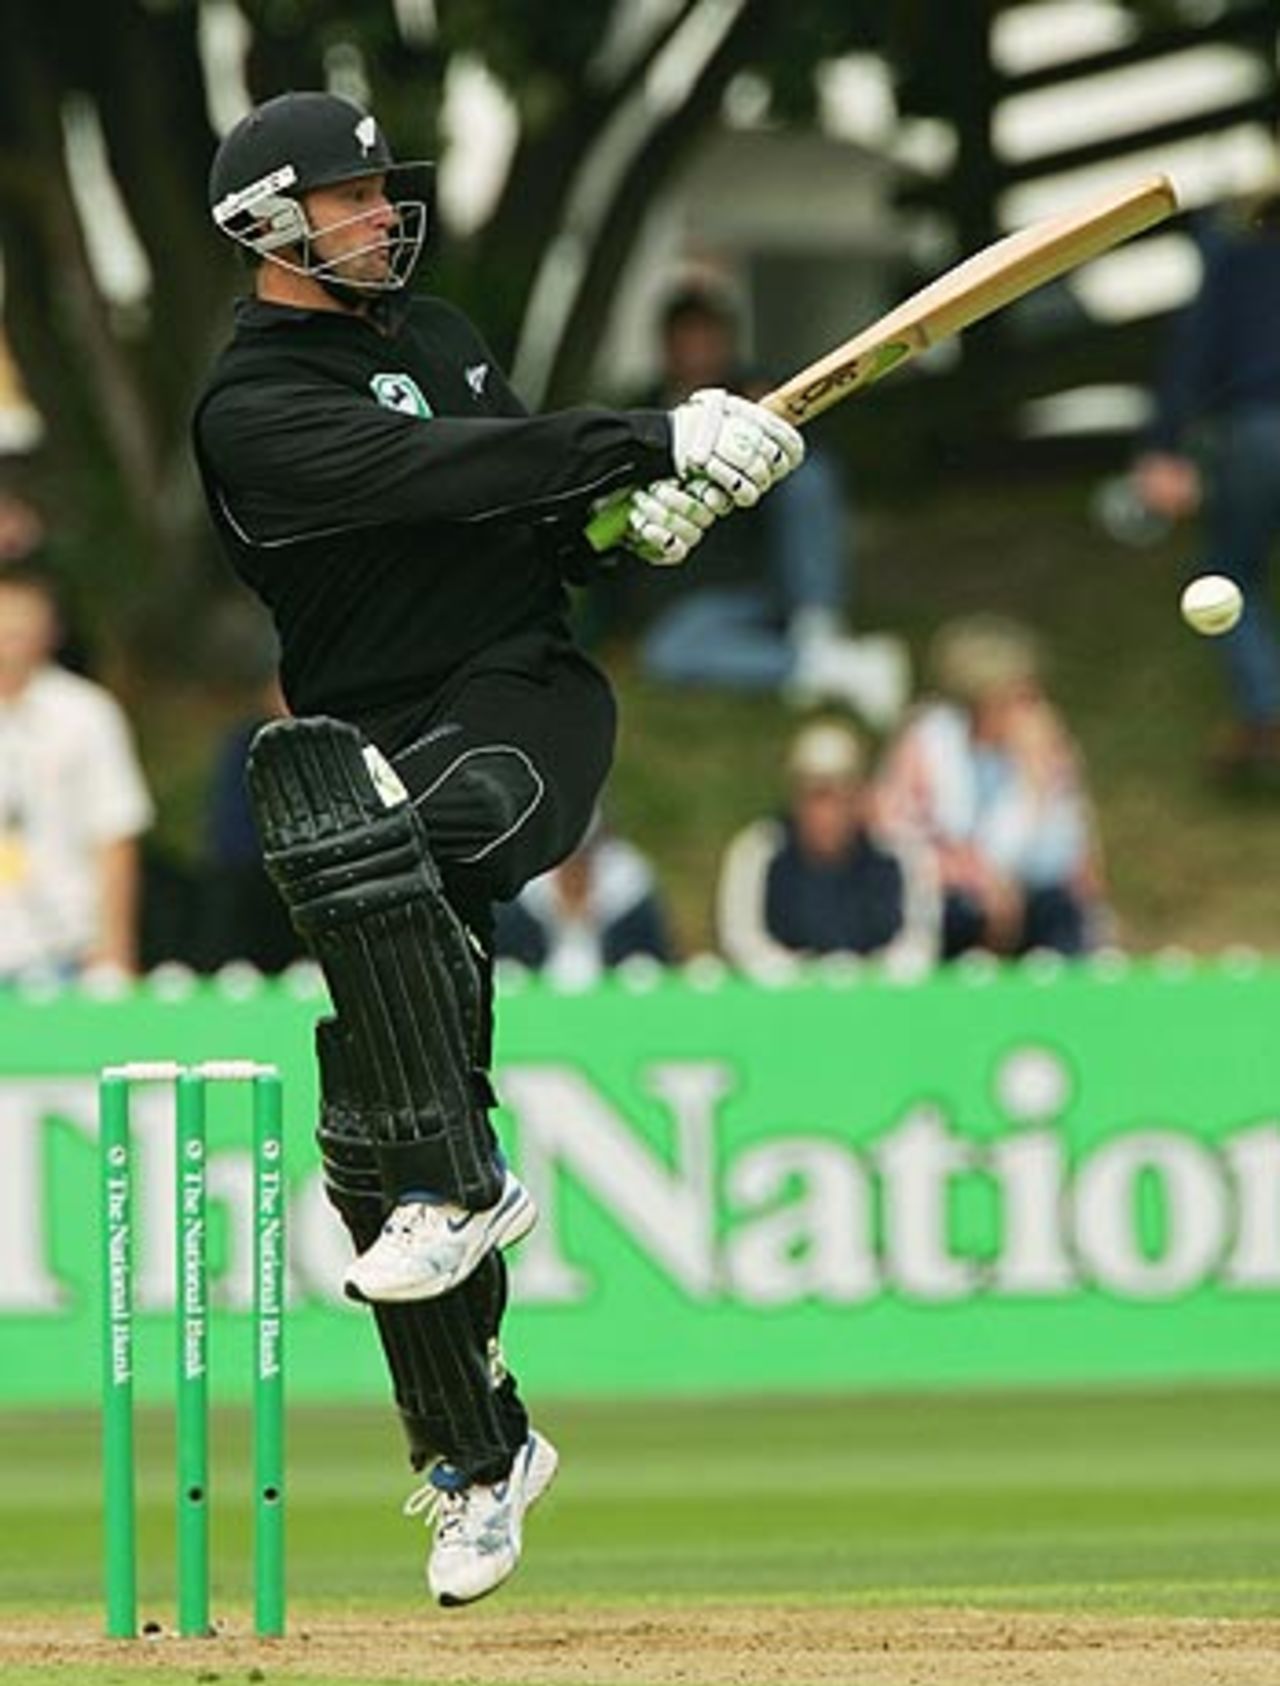 Nathan Astle's 37 was the highest score for New Zealand, but it wasn't remotely enough, New Zealand v Australia, 4th ODI, Wellington, March 1, 2005